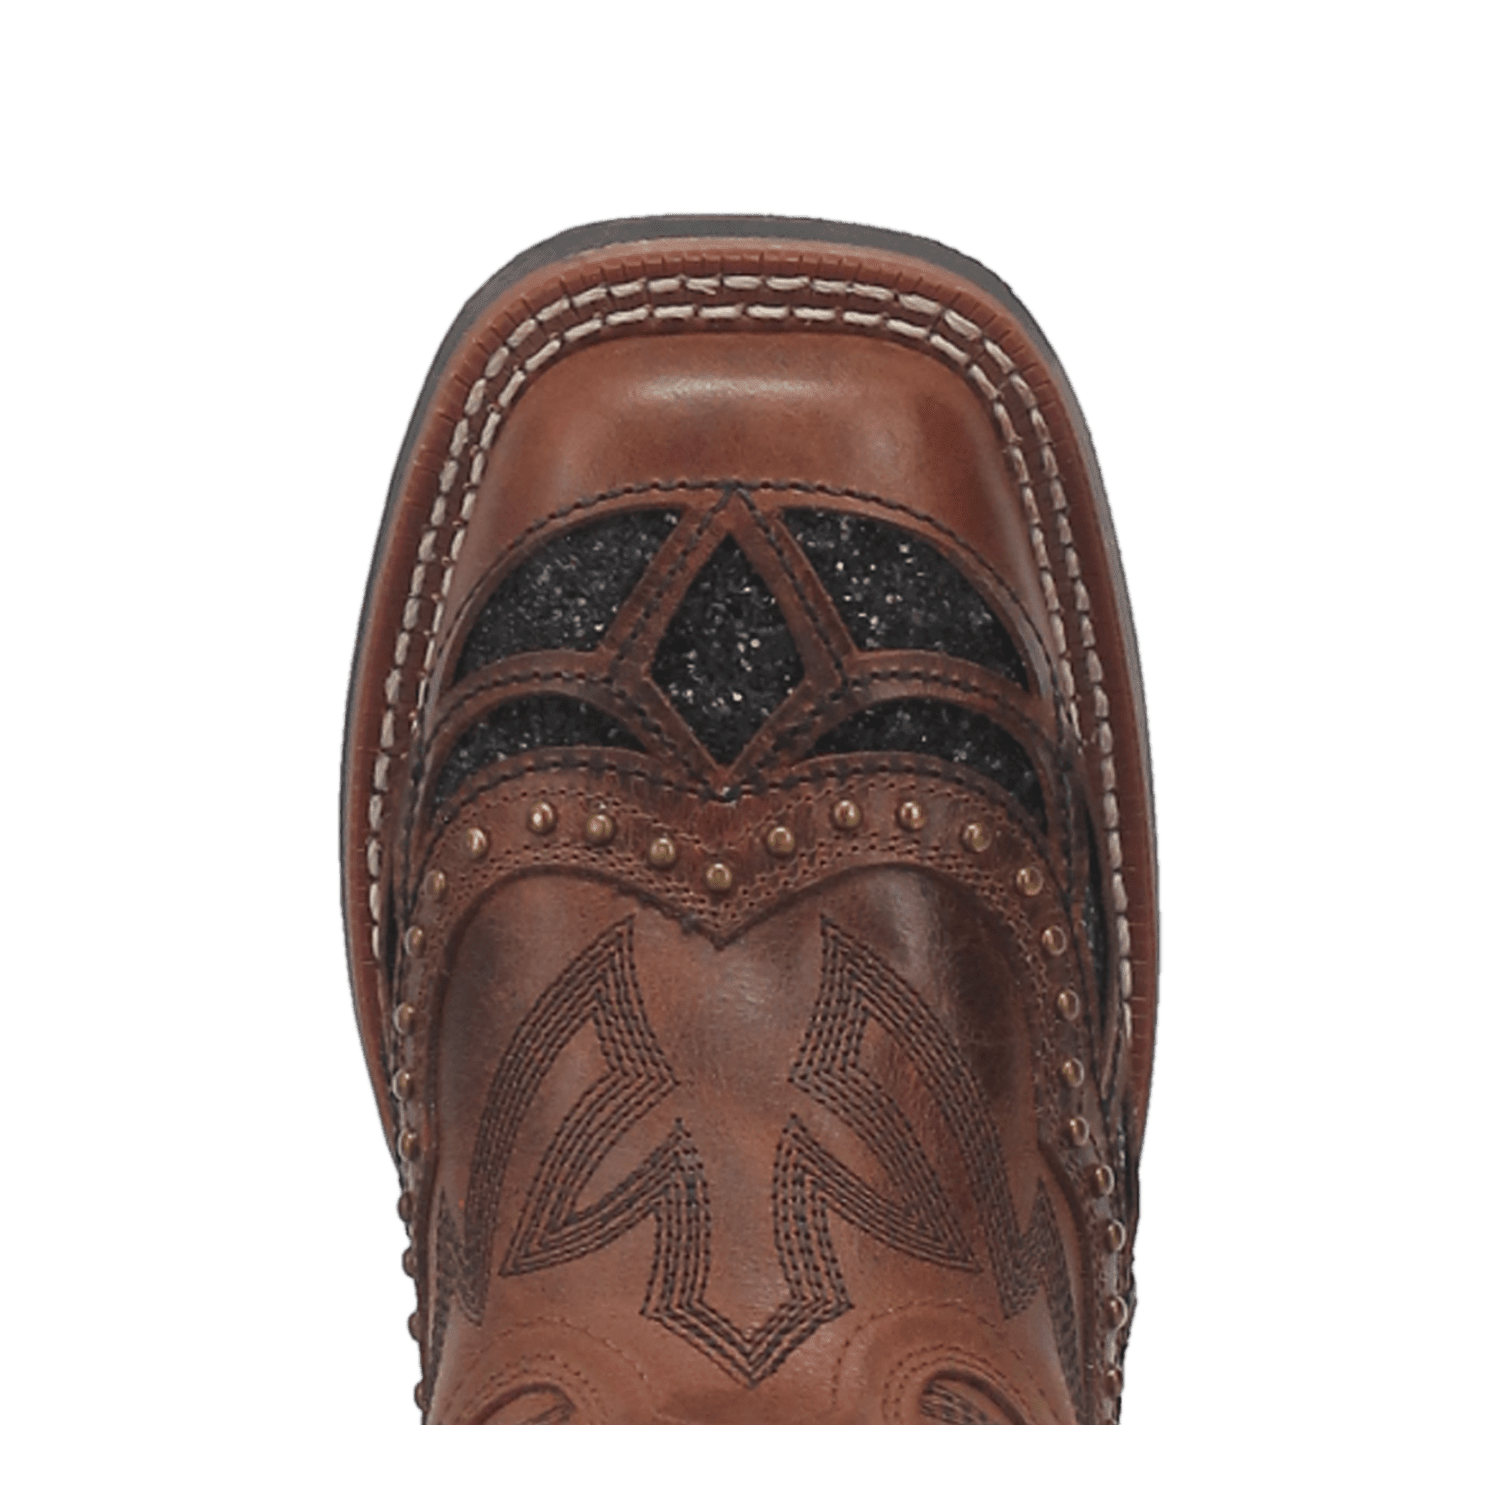 ETERNITY LEATHER BOOT Image